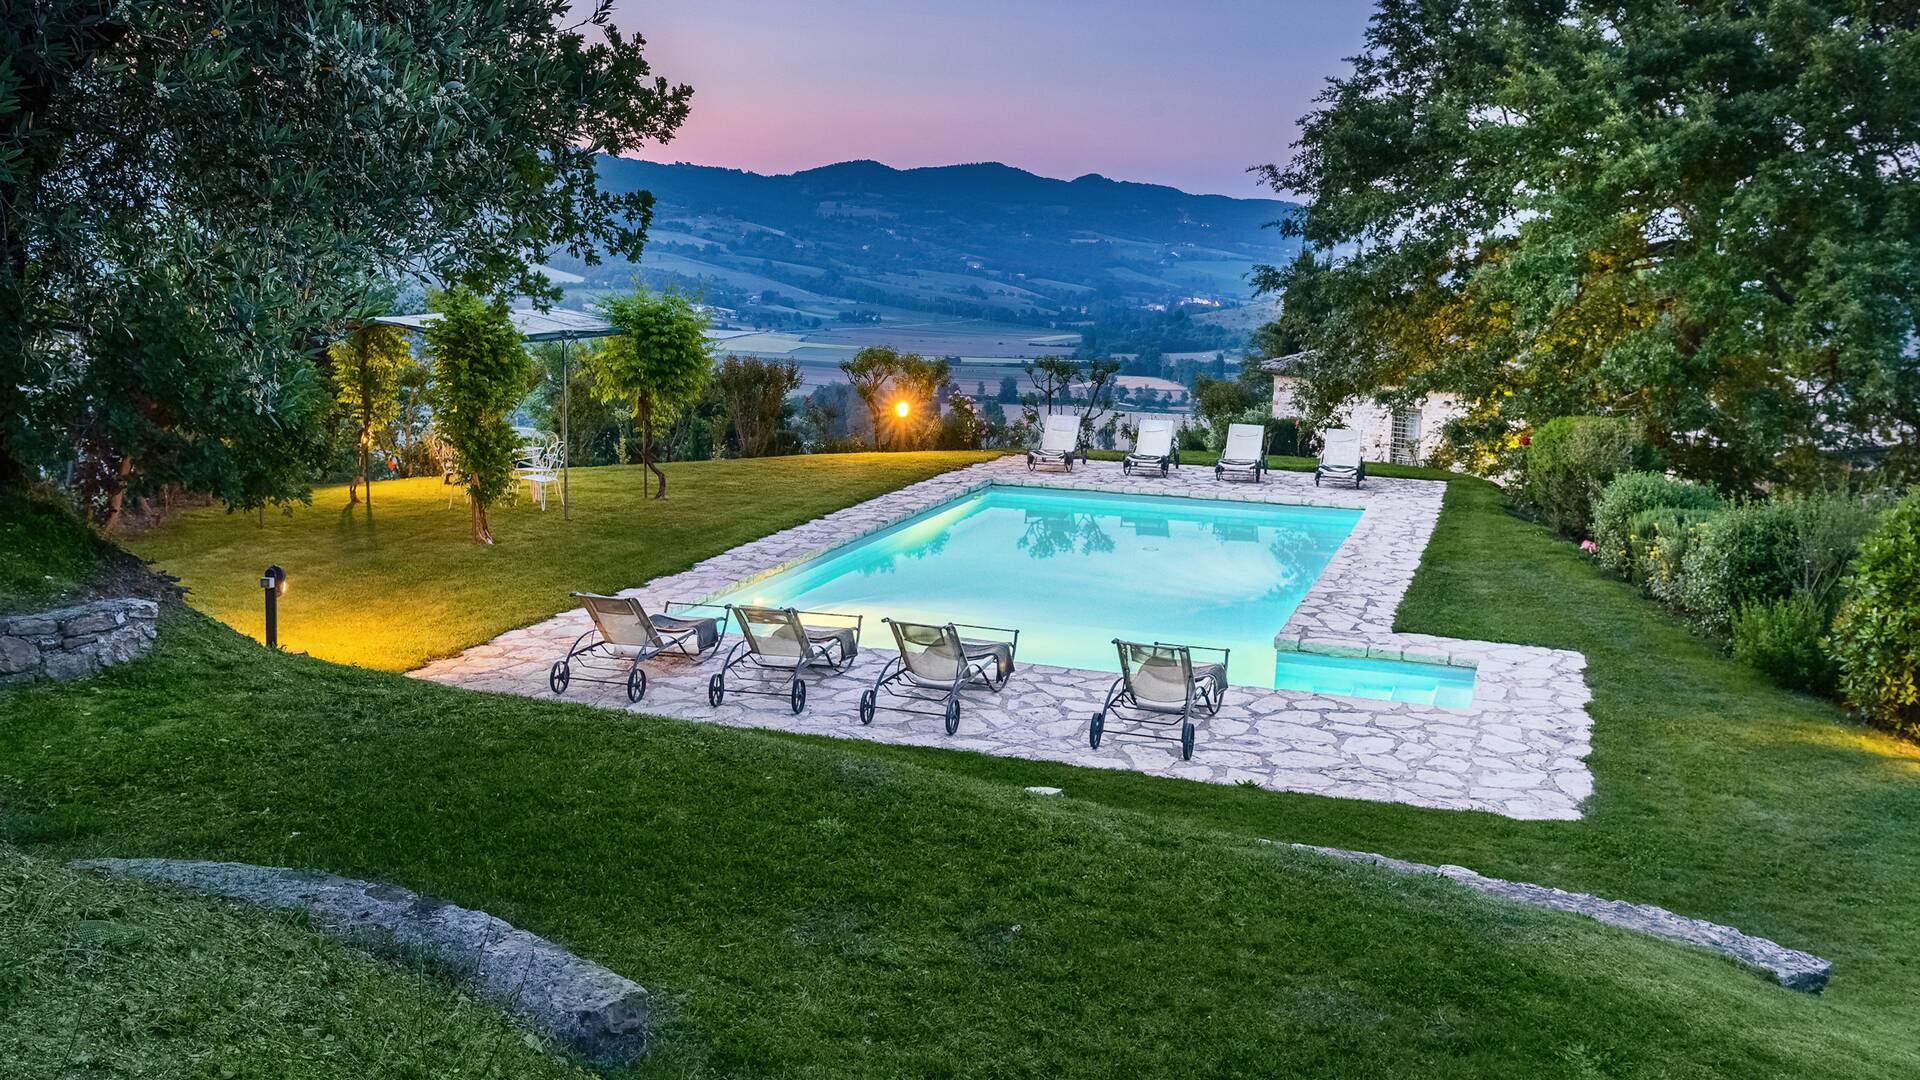 luxury family vacation villa Ada for weekly rentals in Umbria, Tuscany boarder